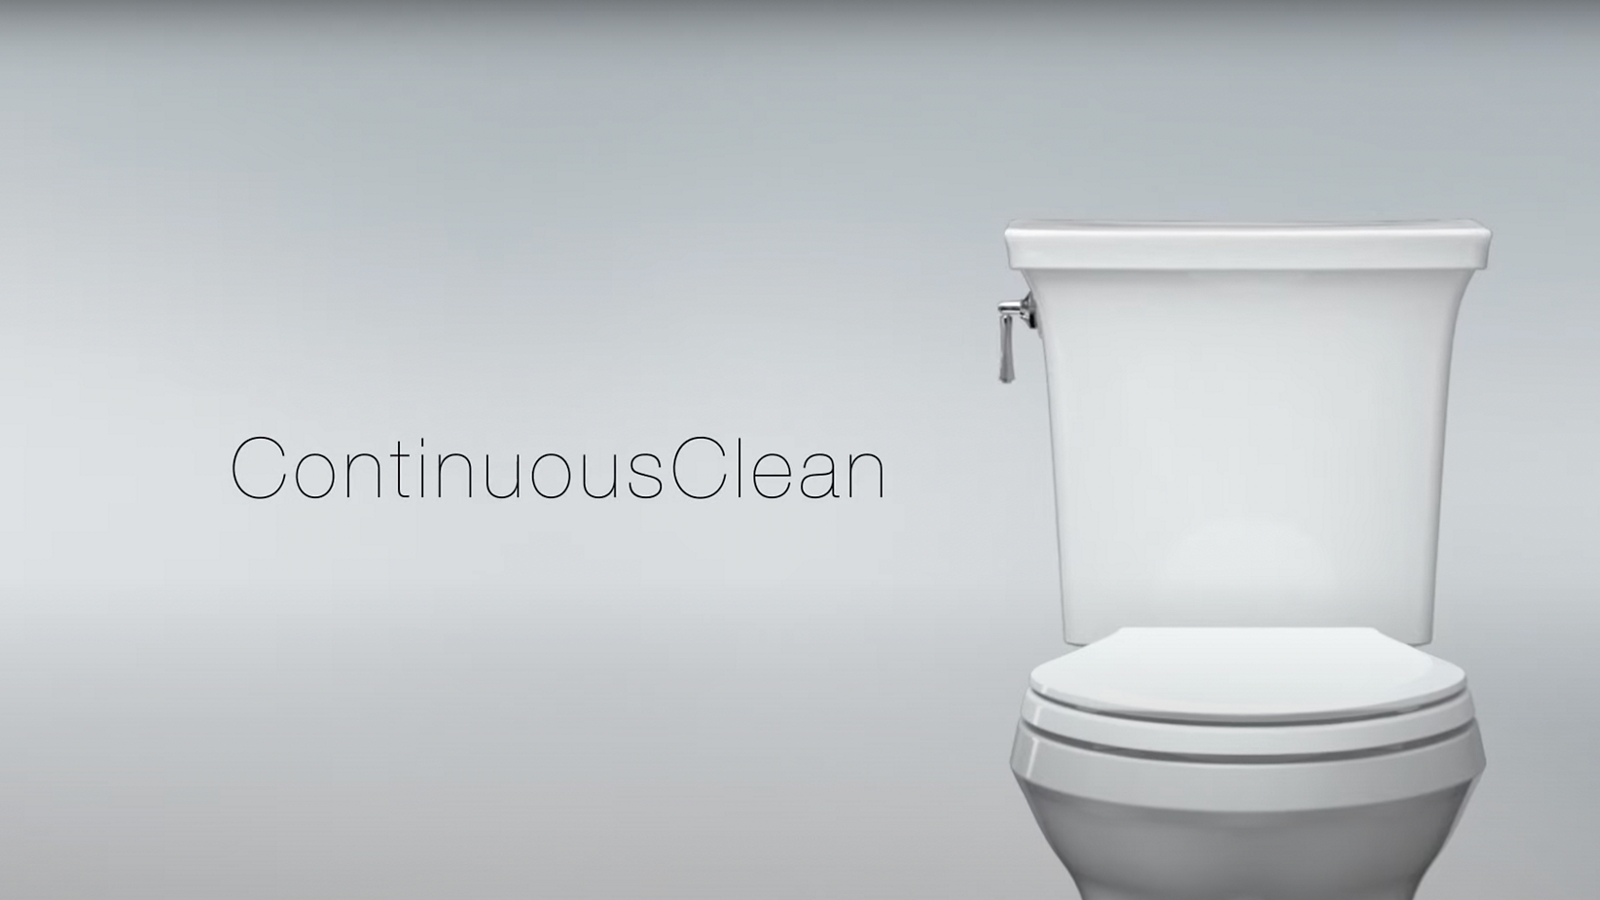 ContinuousClean Technology - a Self-Cleaning Toilet Feature